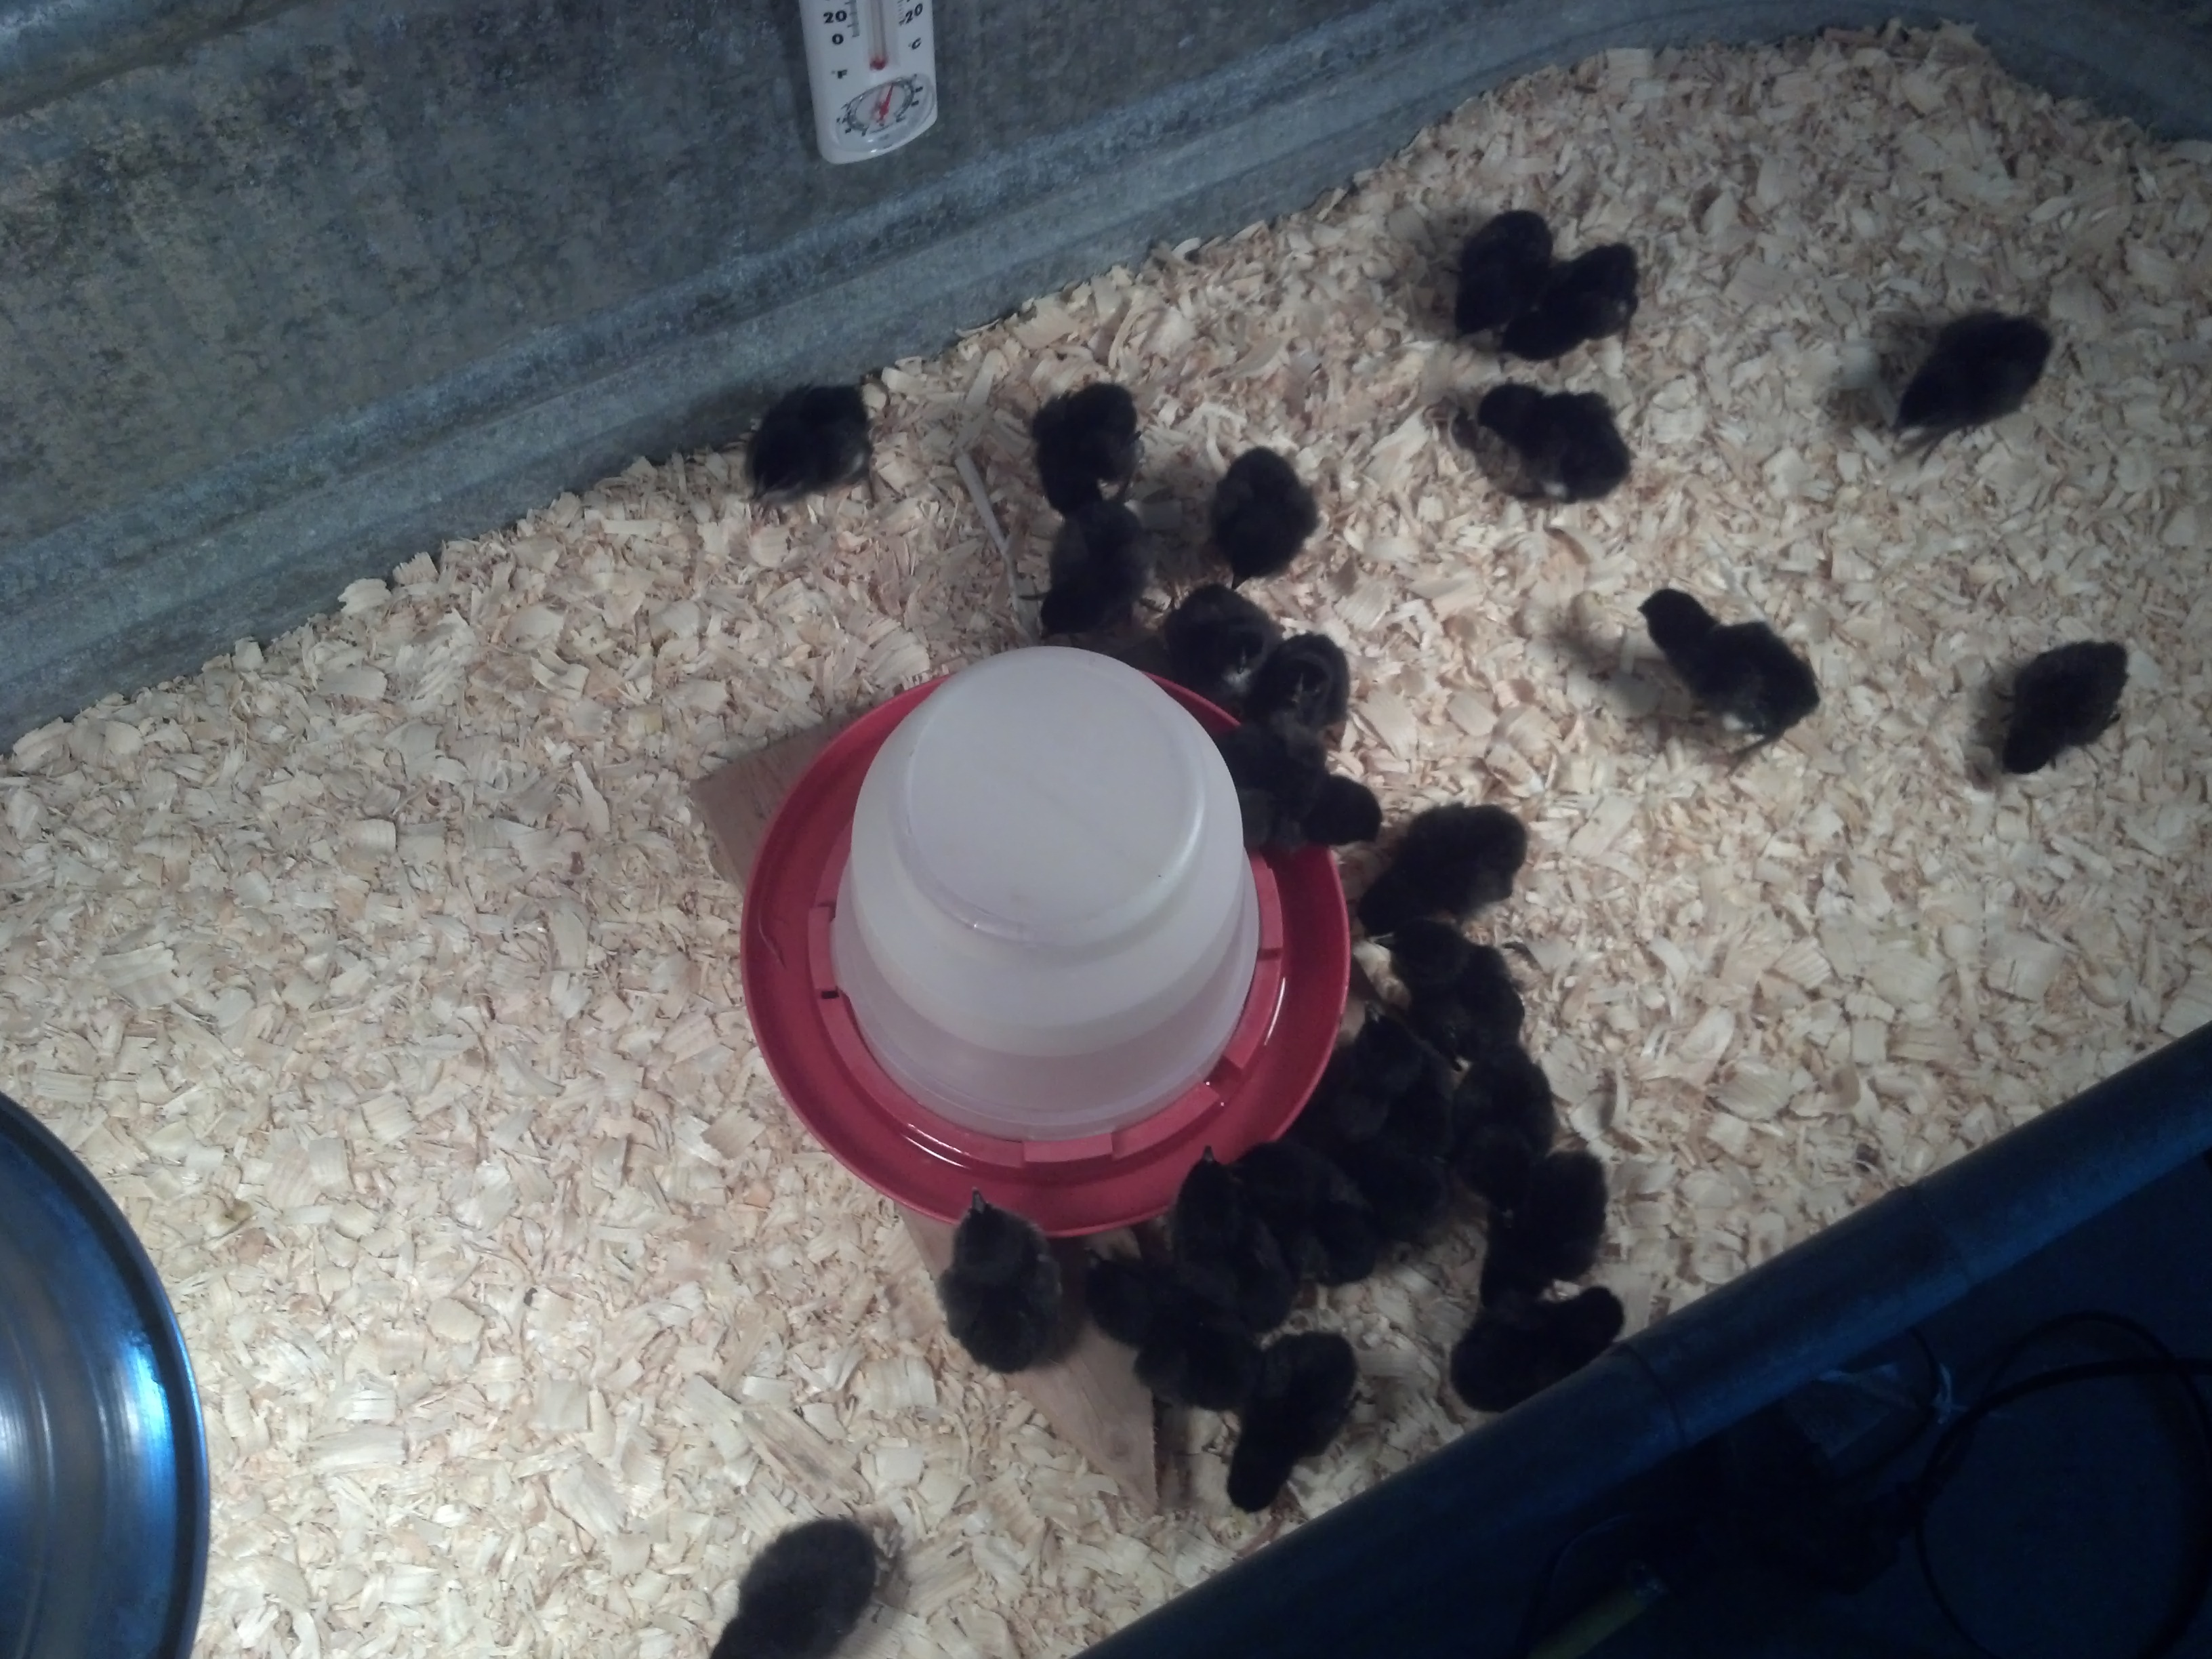 our 25 4-H Black Sexlink babies arrived 4/30/12. They are precious